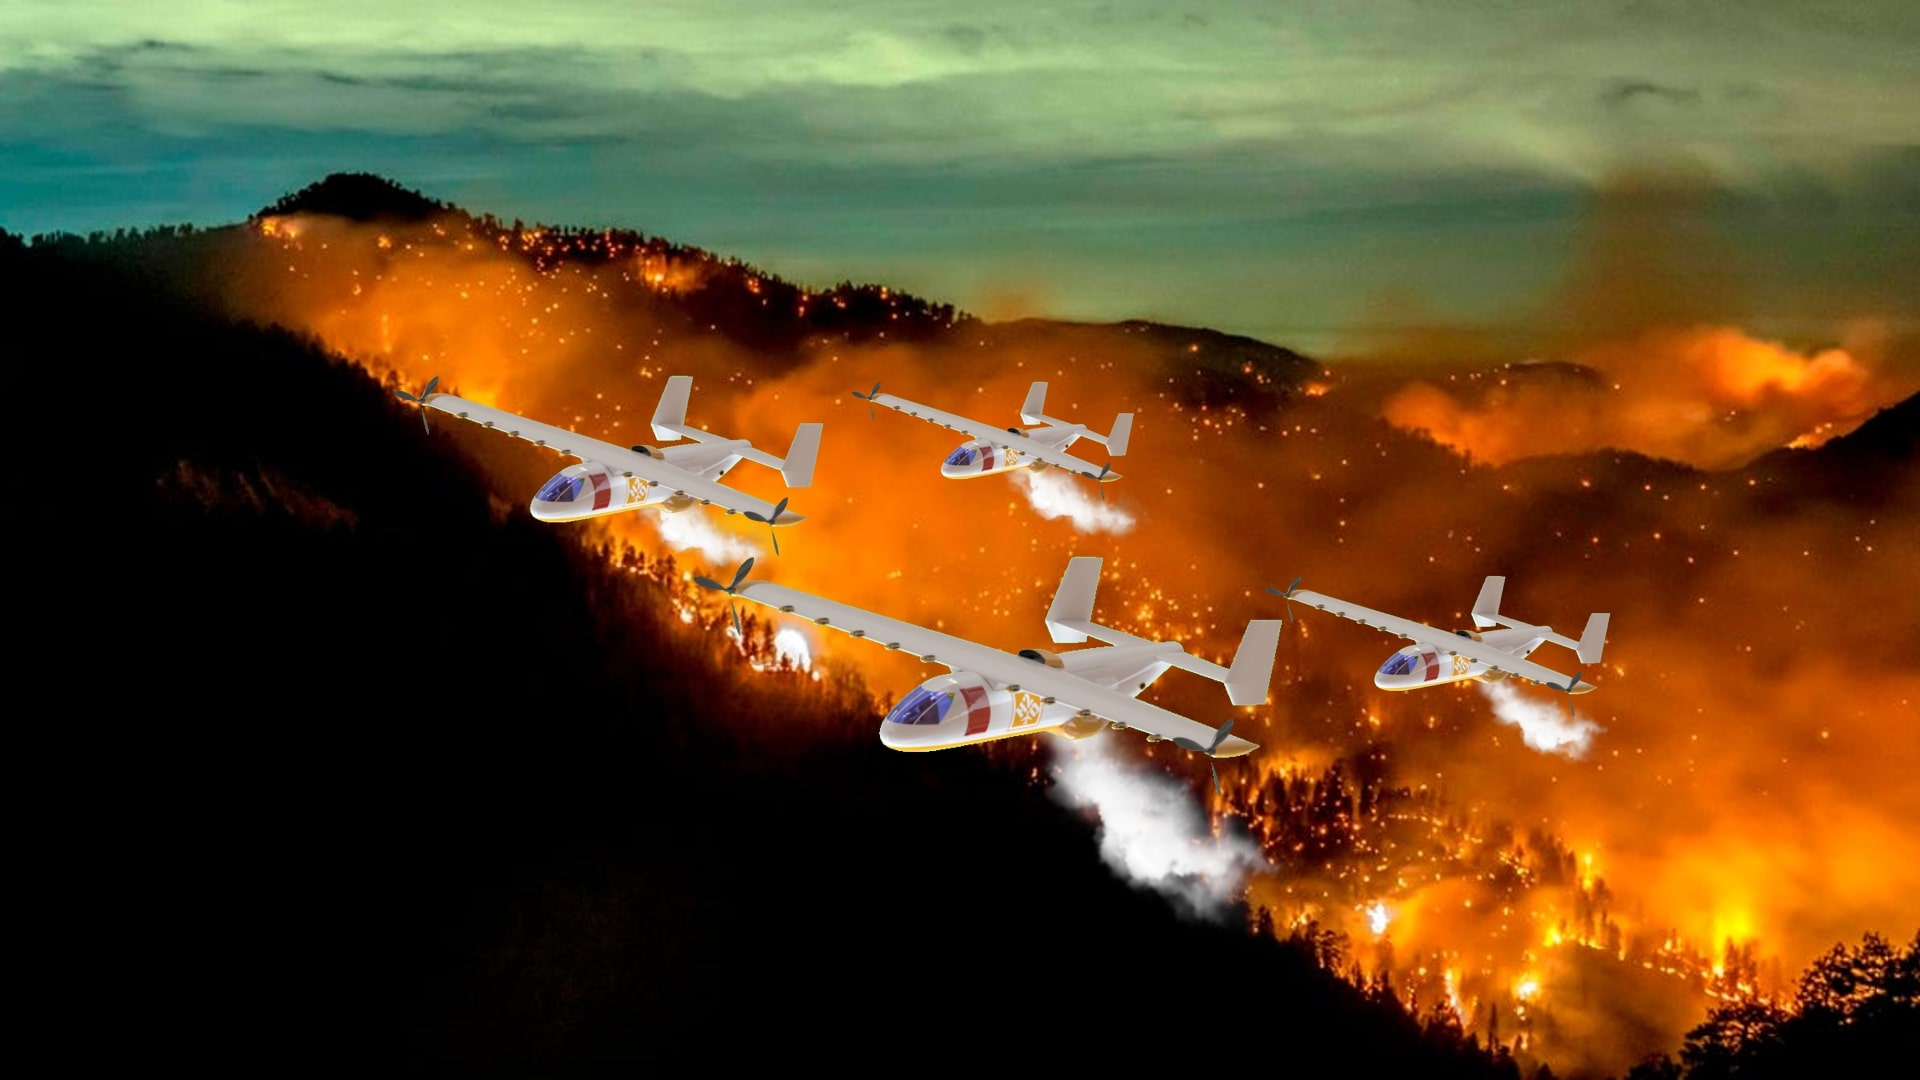 Artist illustration of the WATR RAM Concept putting out wild fires.